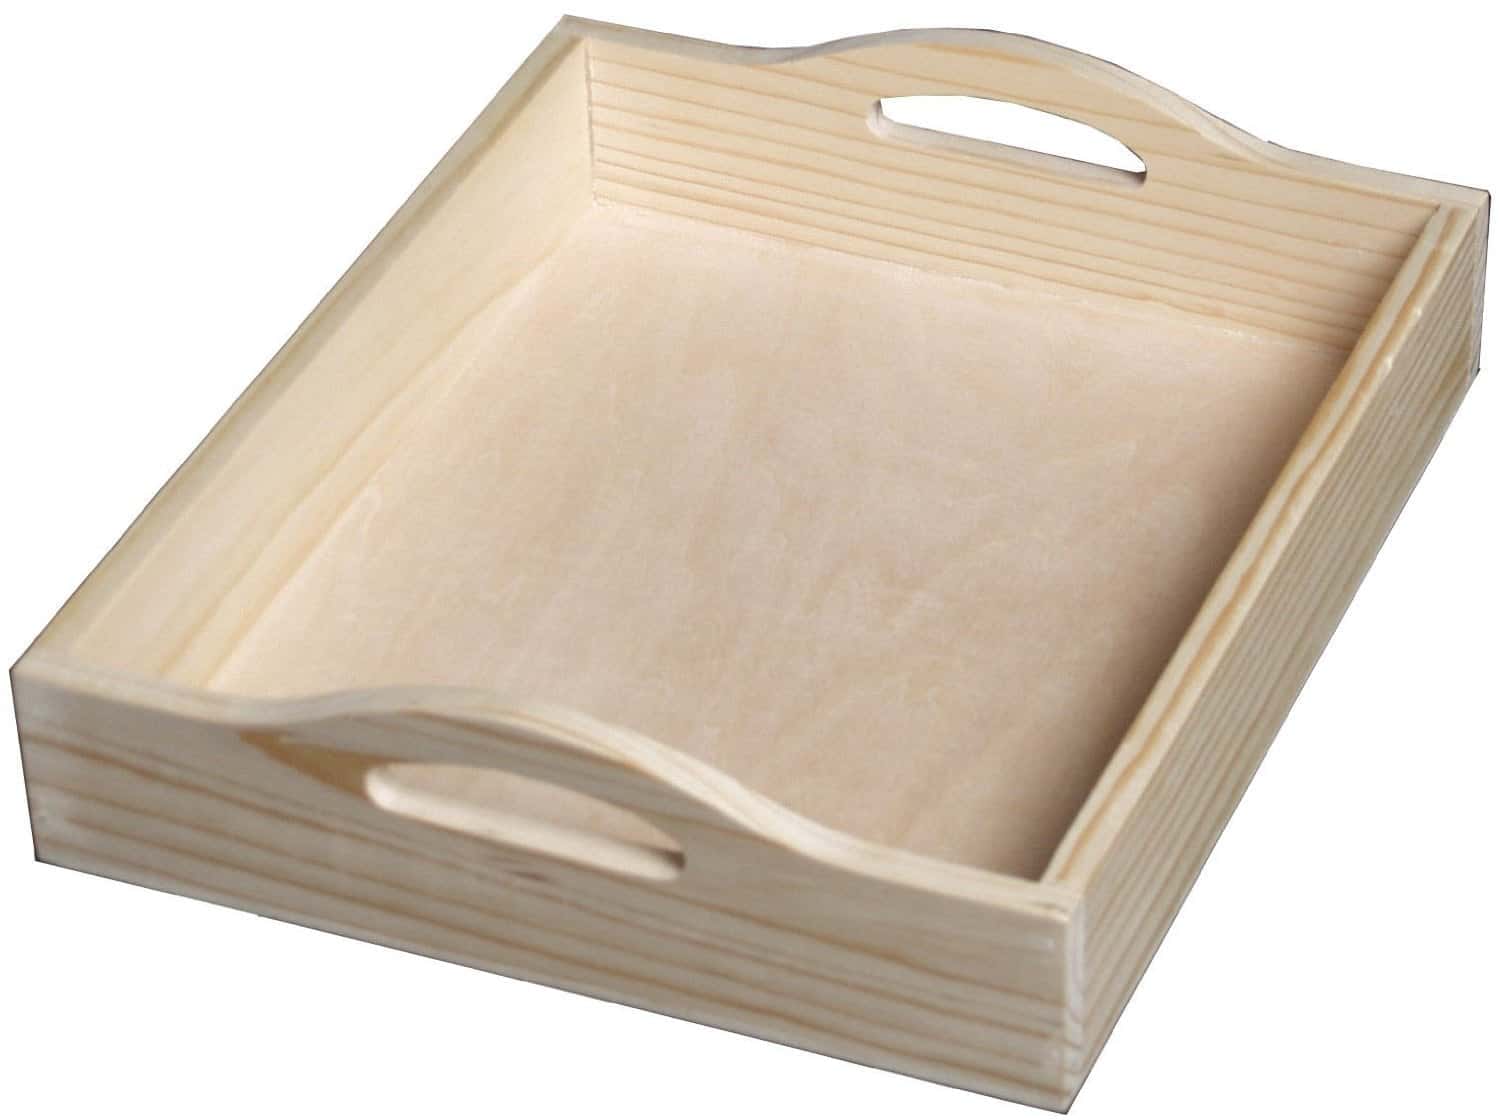 Awesome Crafting Blanks You Can Get on Amazon Prime : Trays | www.thepinningmama.com